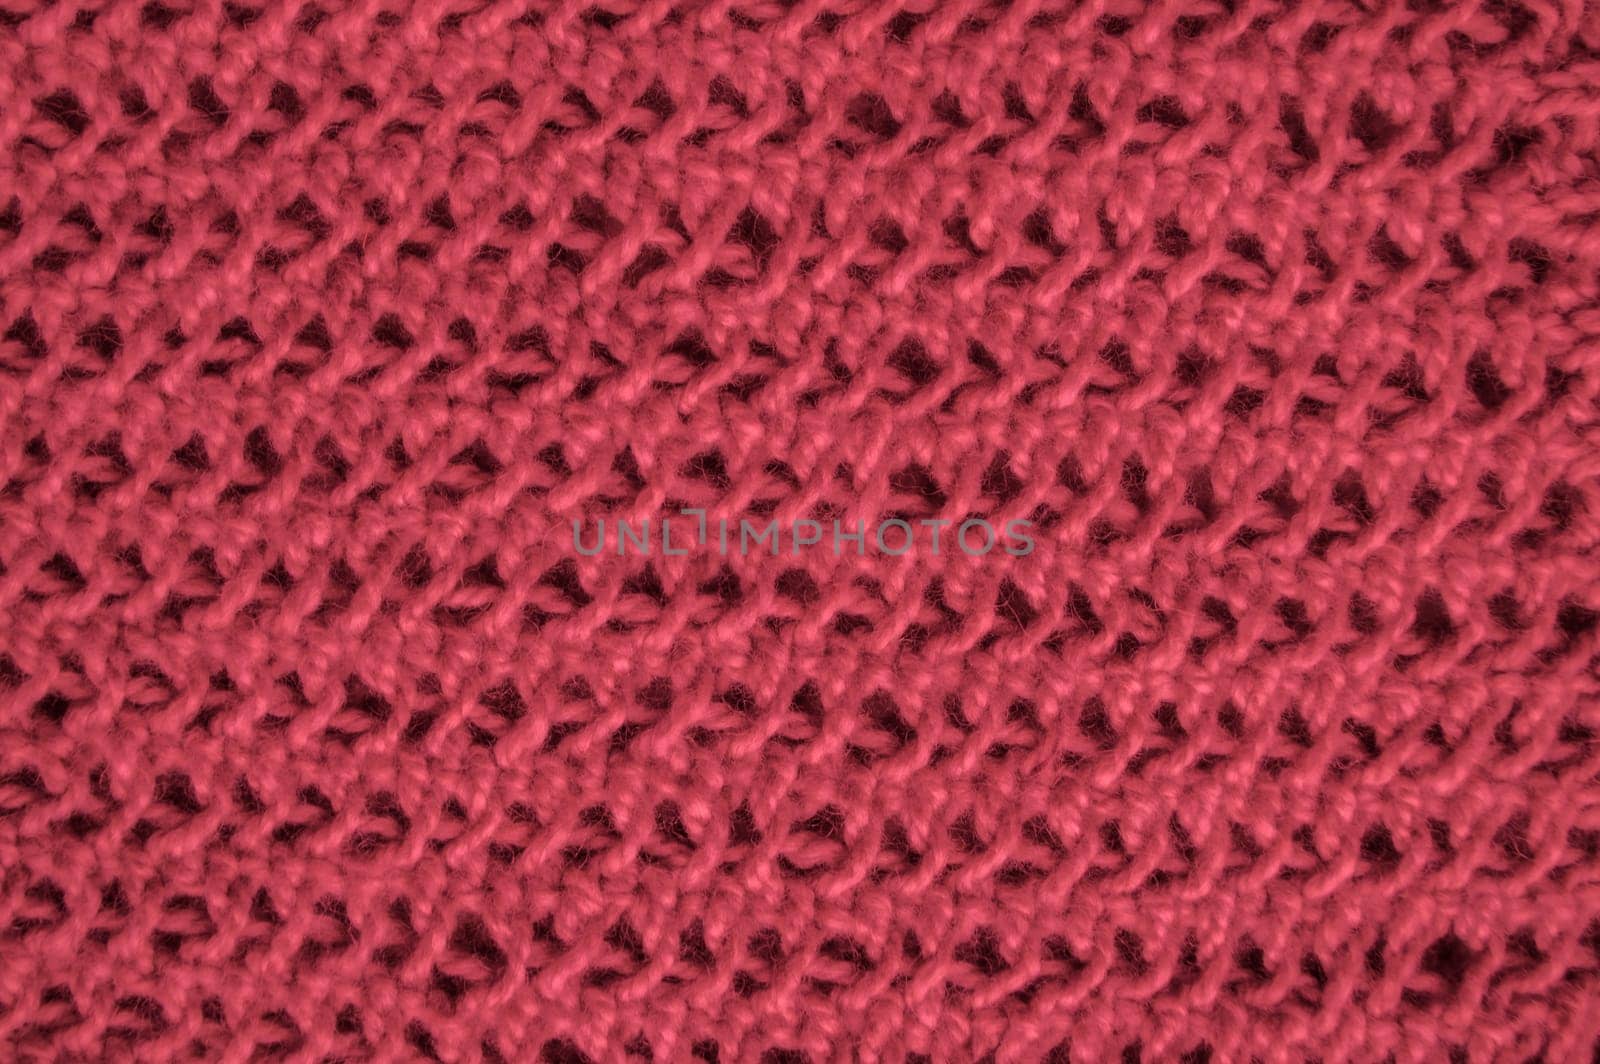 Knitted Fabric. Organic Woven Pattern. Closeup Handmade Holiday Background. Weave Knitted Wool. Red Detail Thread. Scandinavian Warm Canvas. Cotton Yarn Cashmere. Macro Abstract Wool.